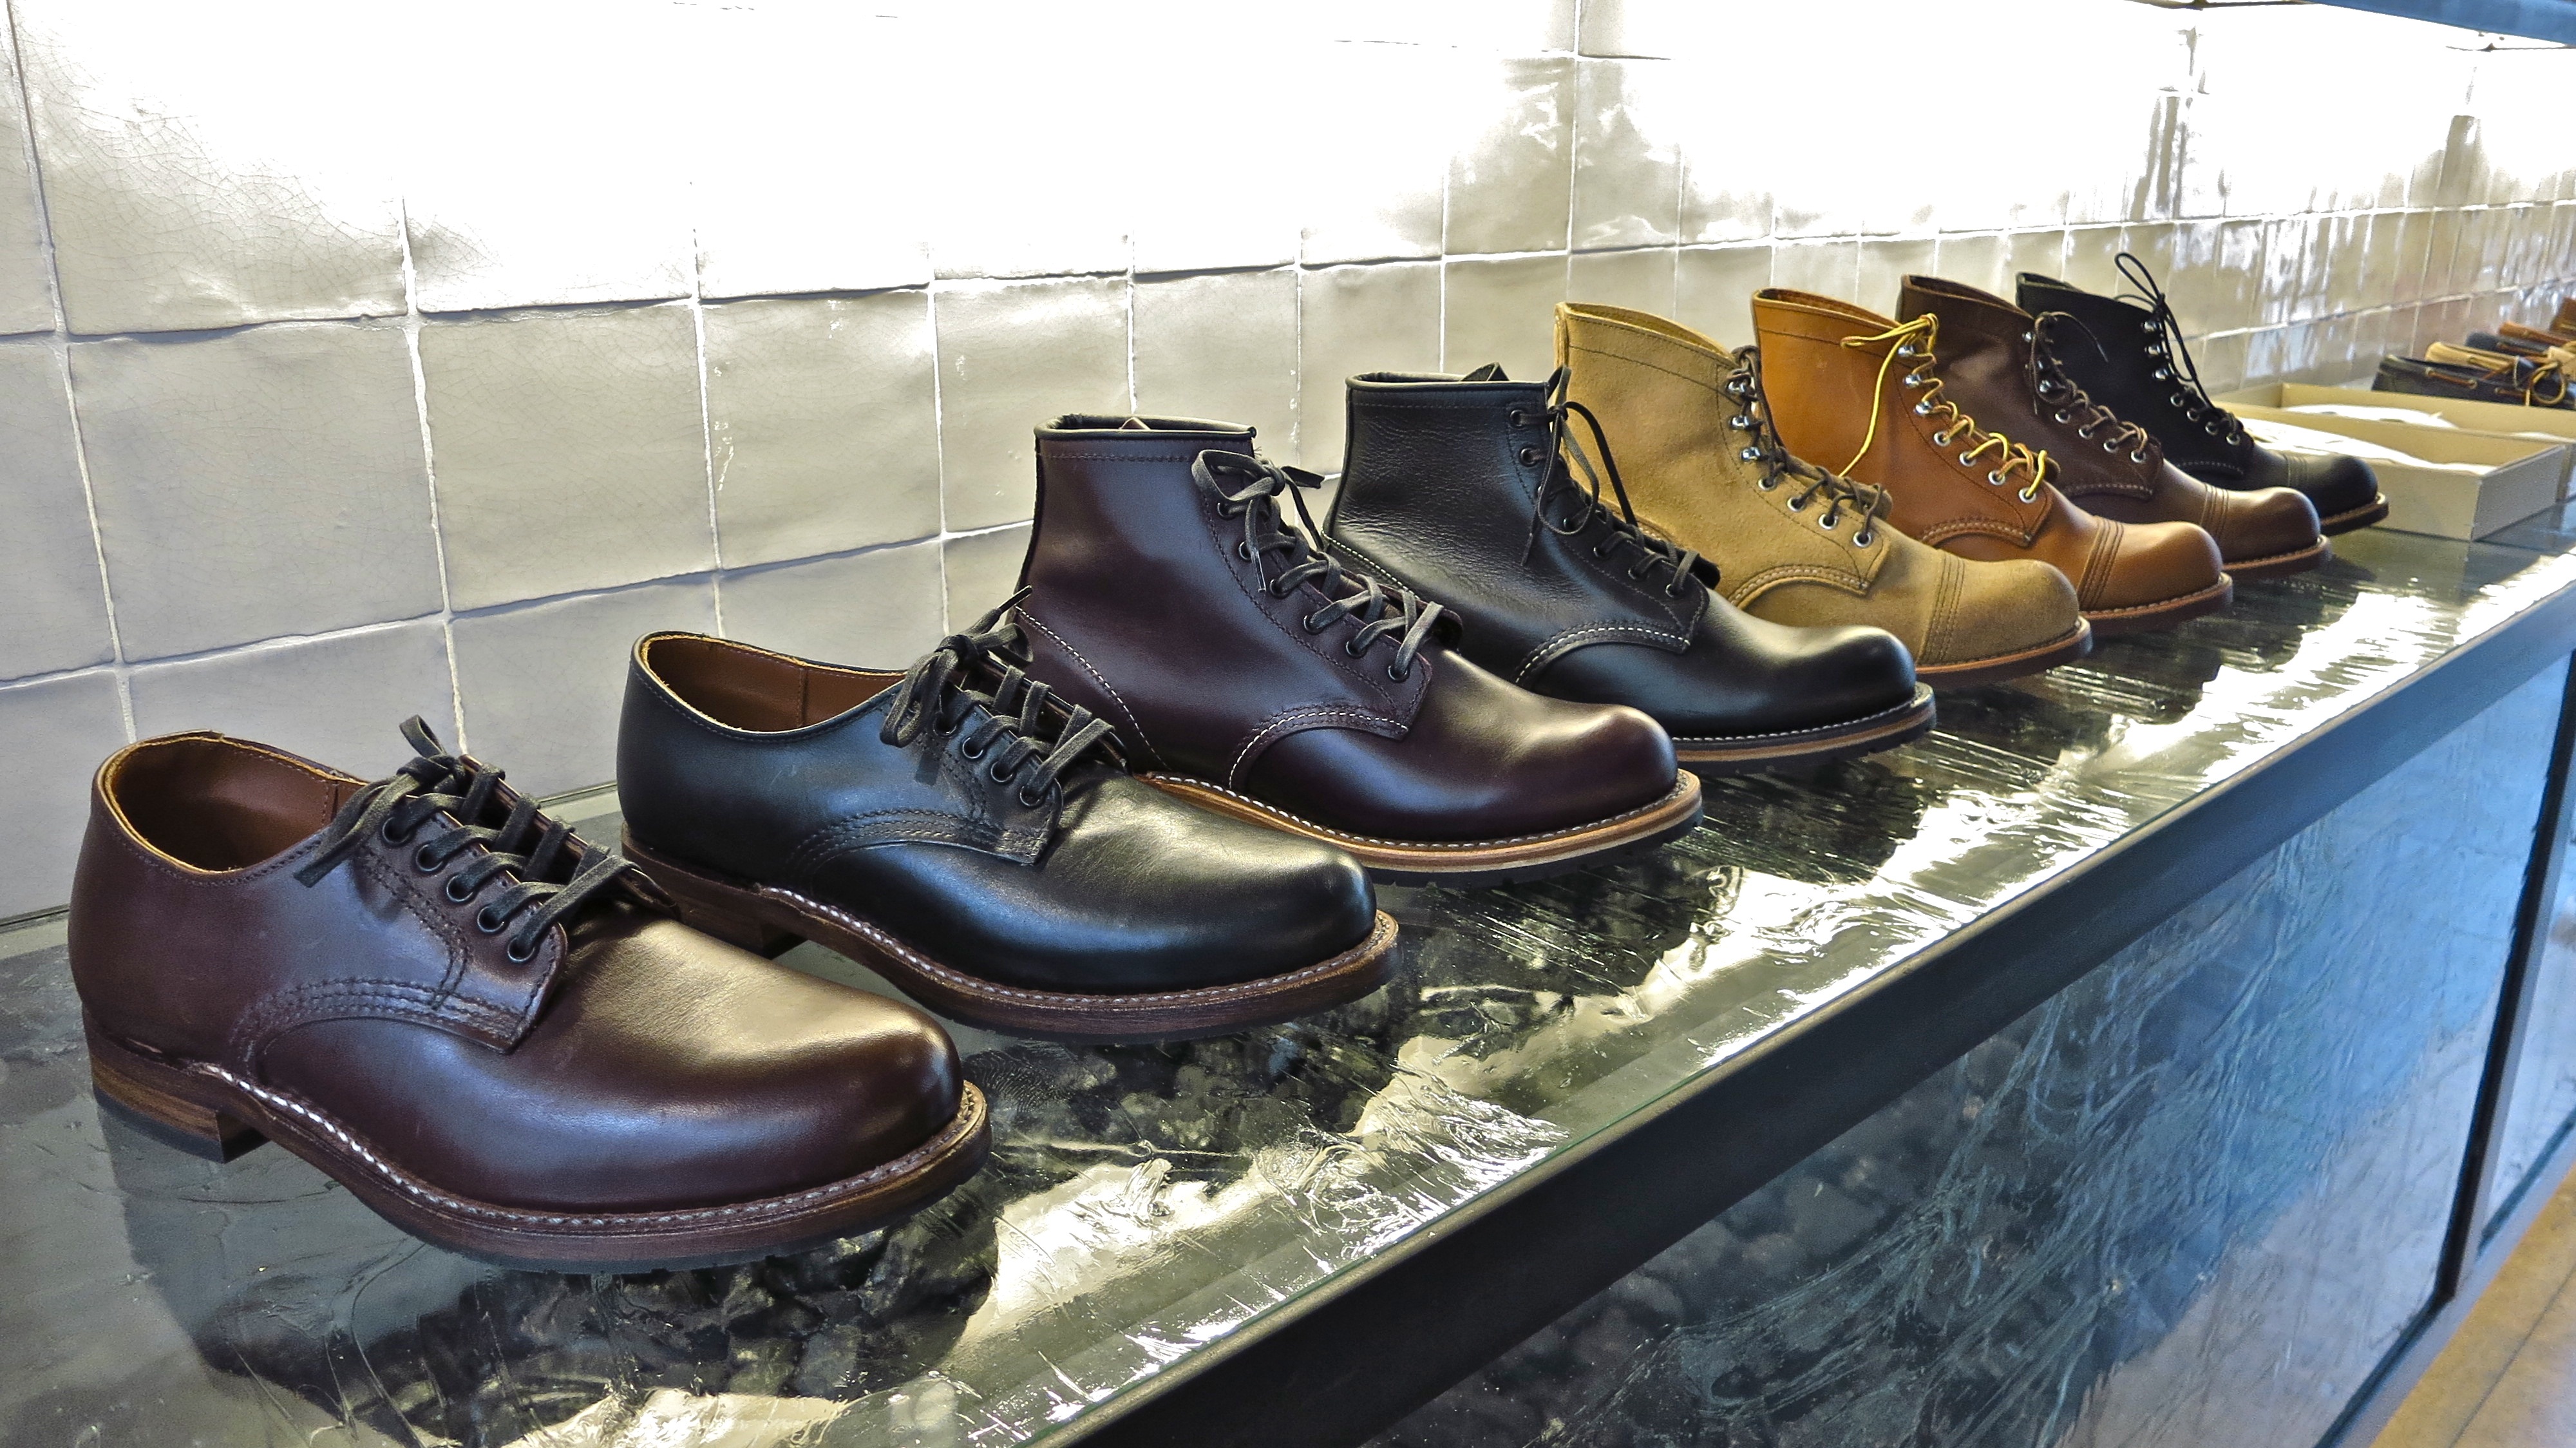 RED WING SHOES - 691 Rt 25A, Miller Place, New York - Shoe Stores